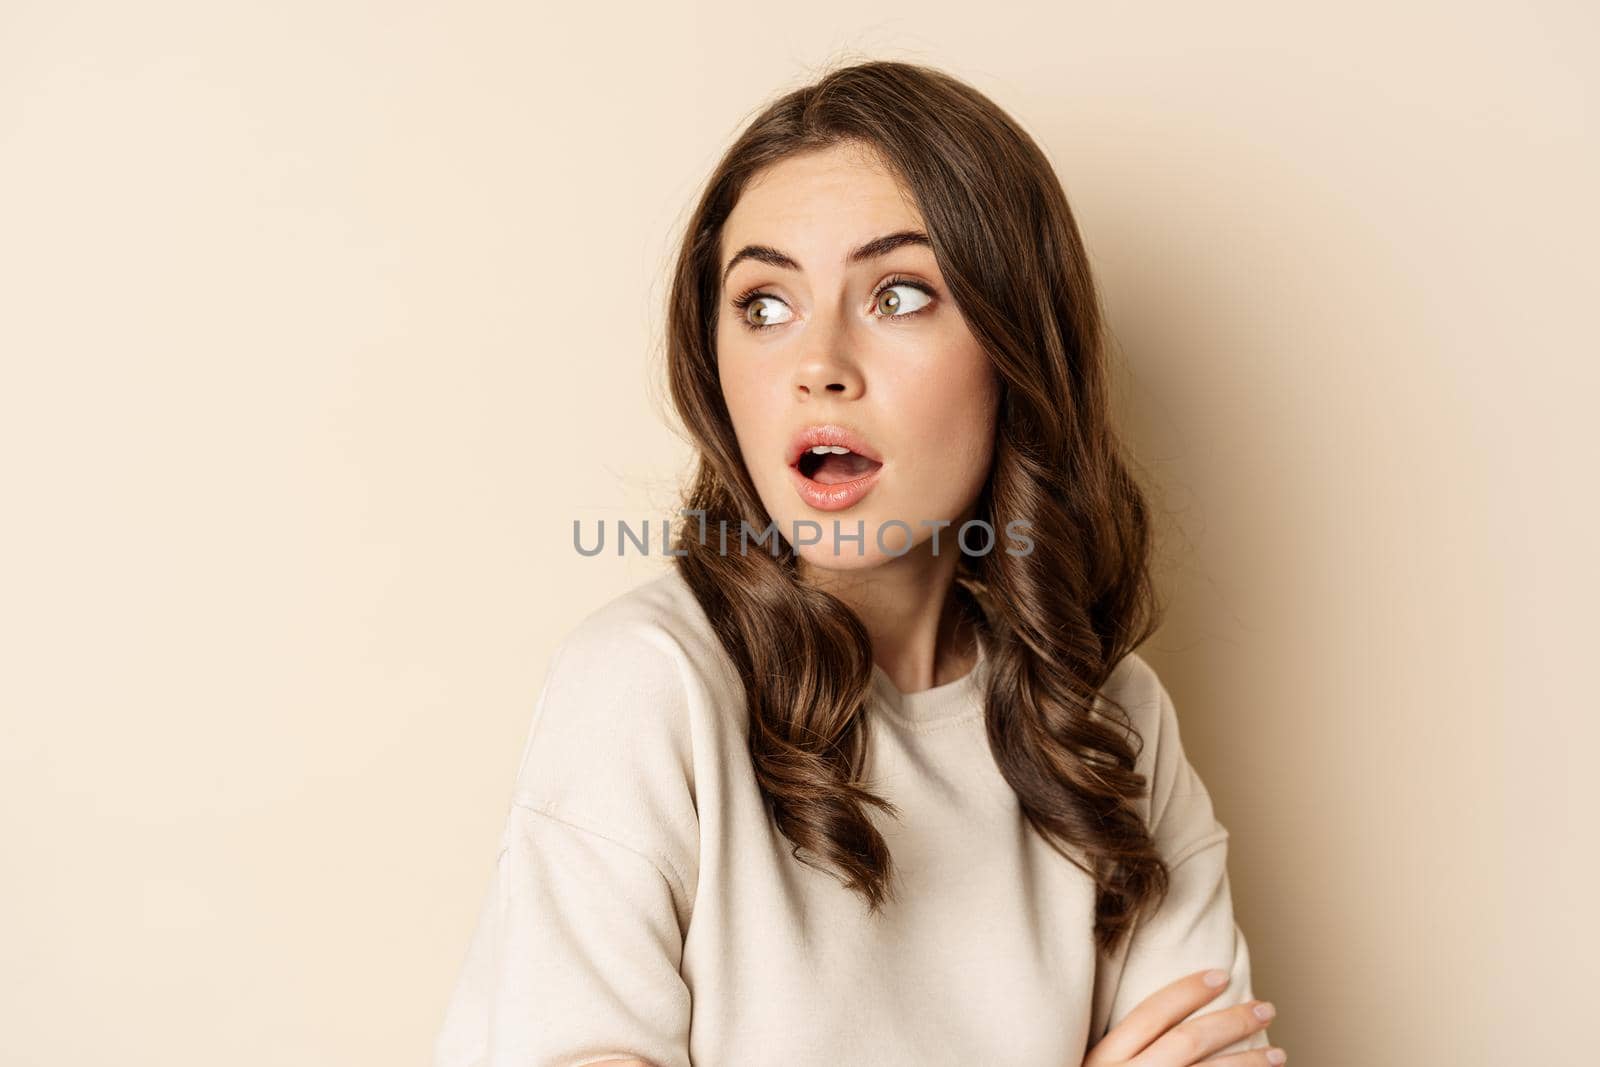 Close up portrait of brunette feminine woman turn back, look behind with surprised face expression, standing against beige background.